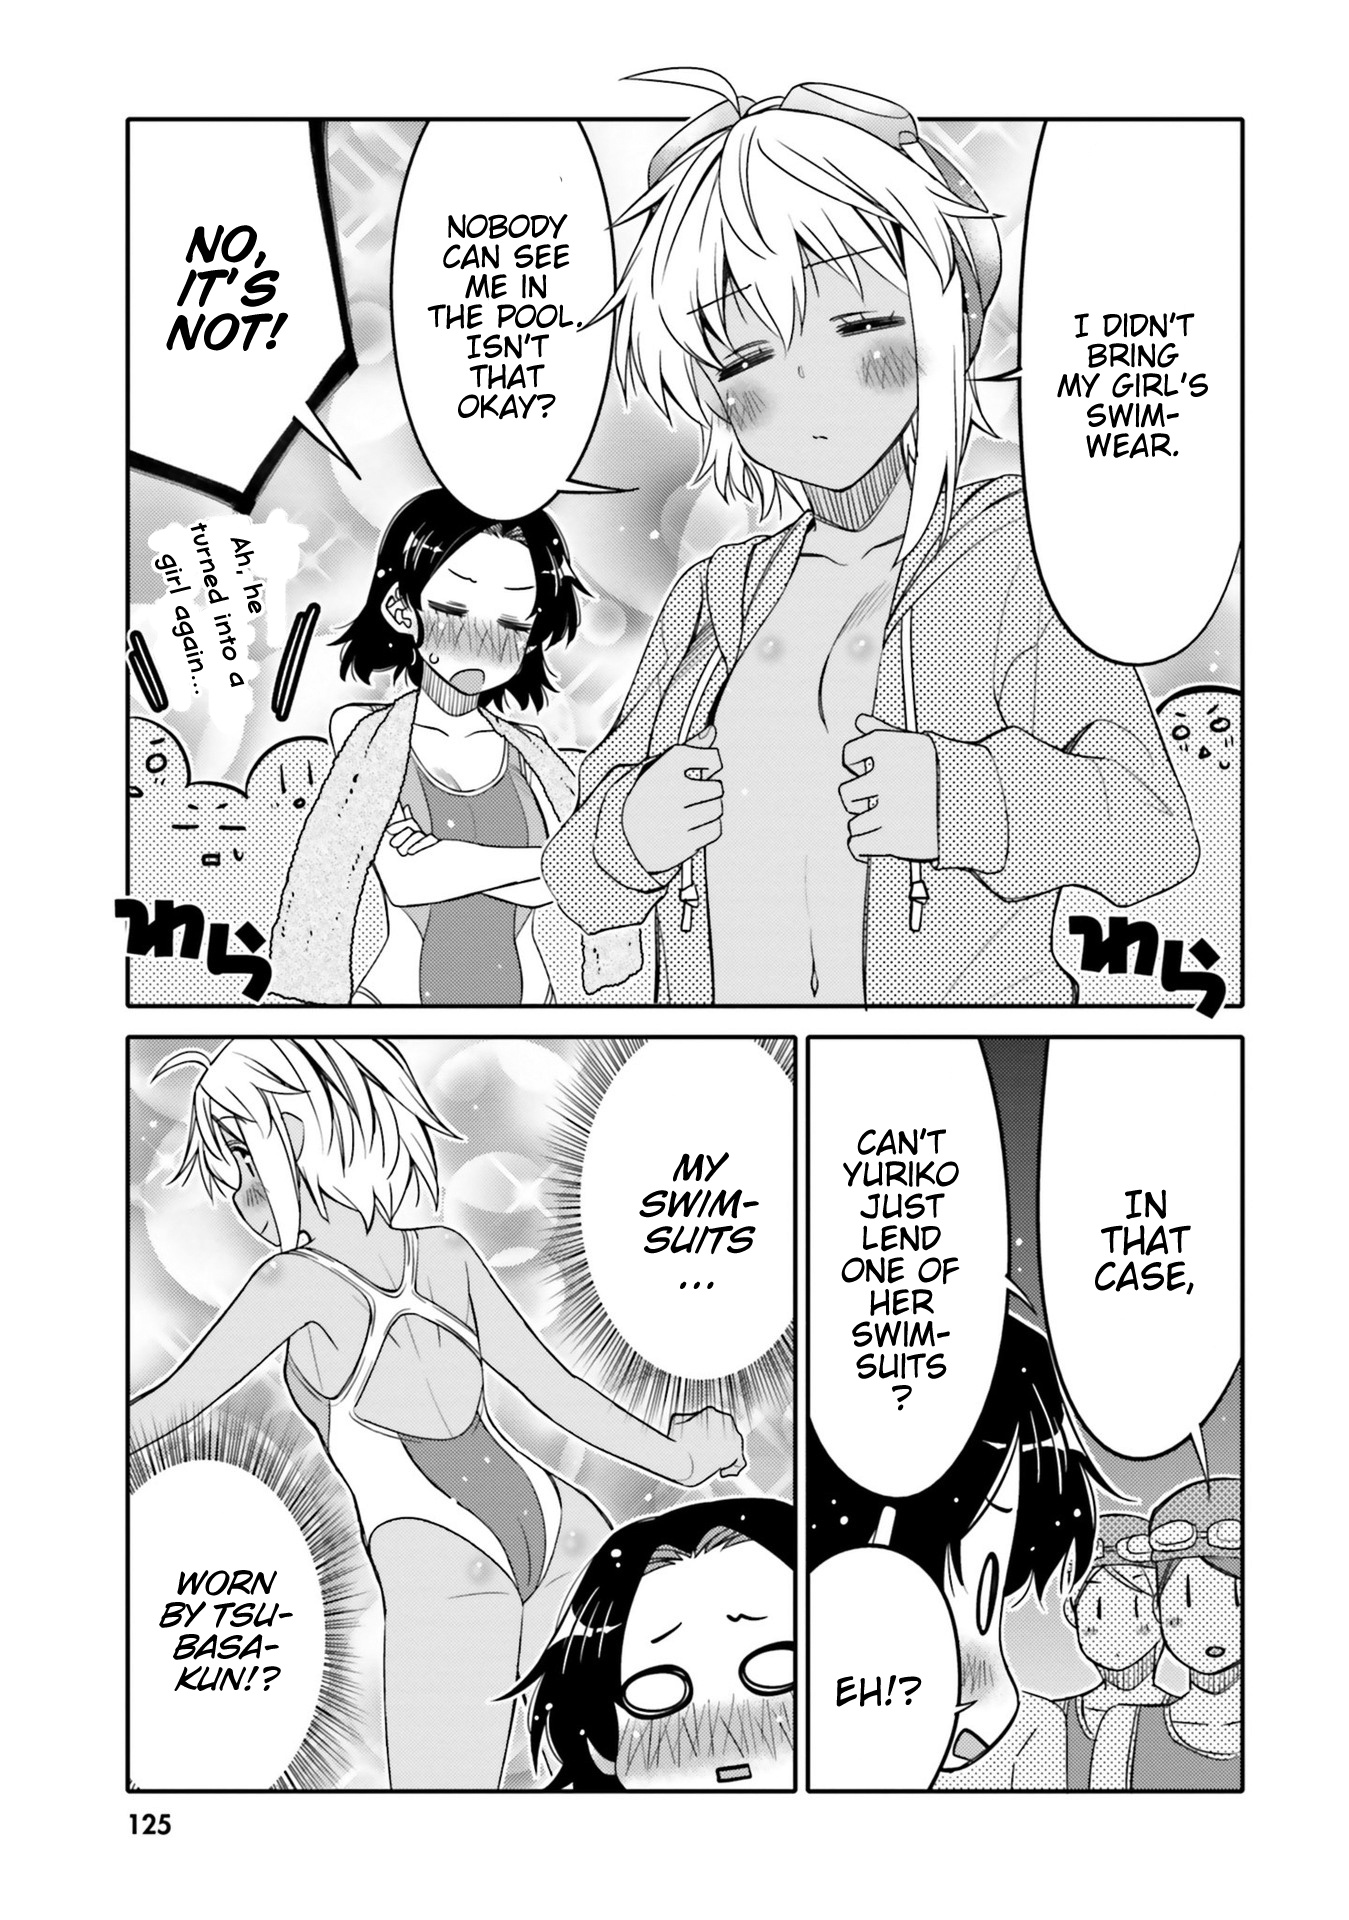 I Am Worried That My Childhood Friend Is Too Cute! - Page 3